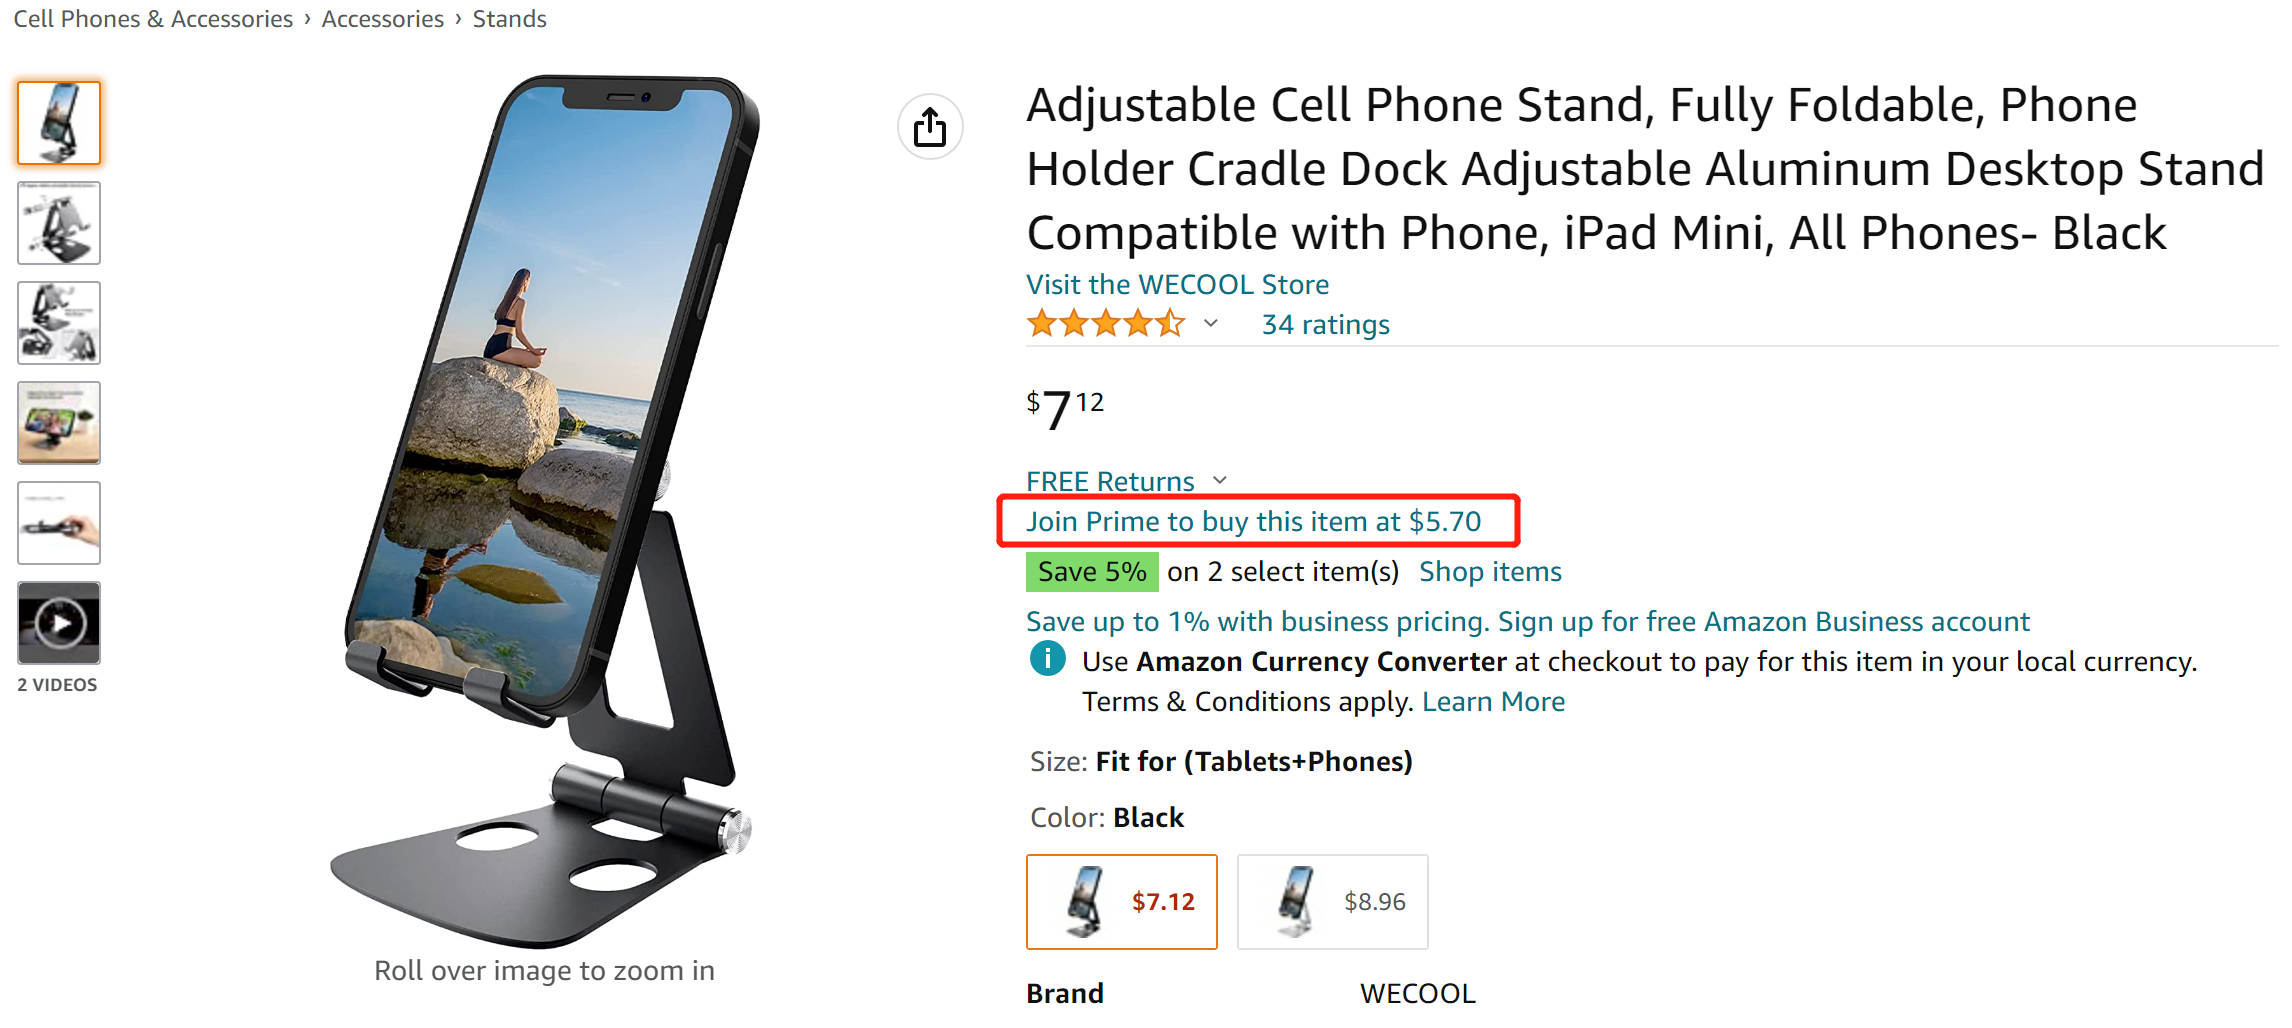 Amazon.com: Adjustable Cell Phone Stand, Fully Foldable, Phone Holder Cradle Dock Adjustable Aluminum Desktop Stand Compatible with Phone, iPad Mini, All Phones- Black : Cell Phones &amp; Accessories